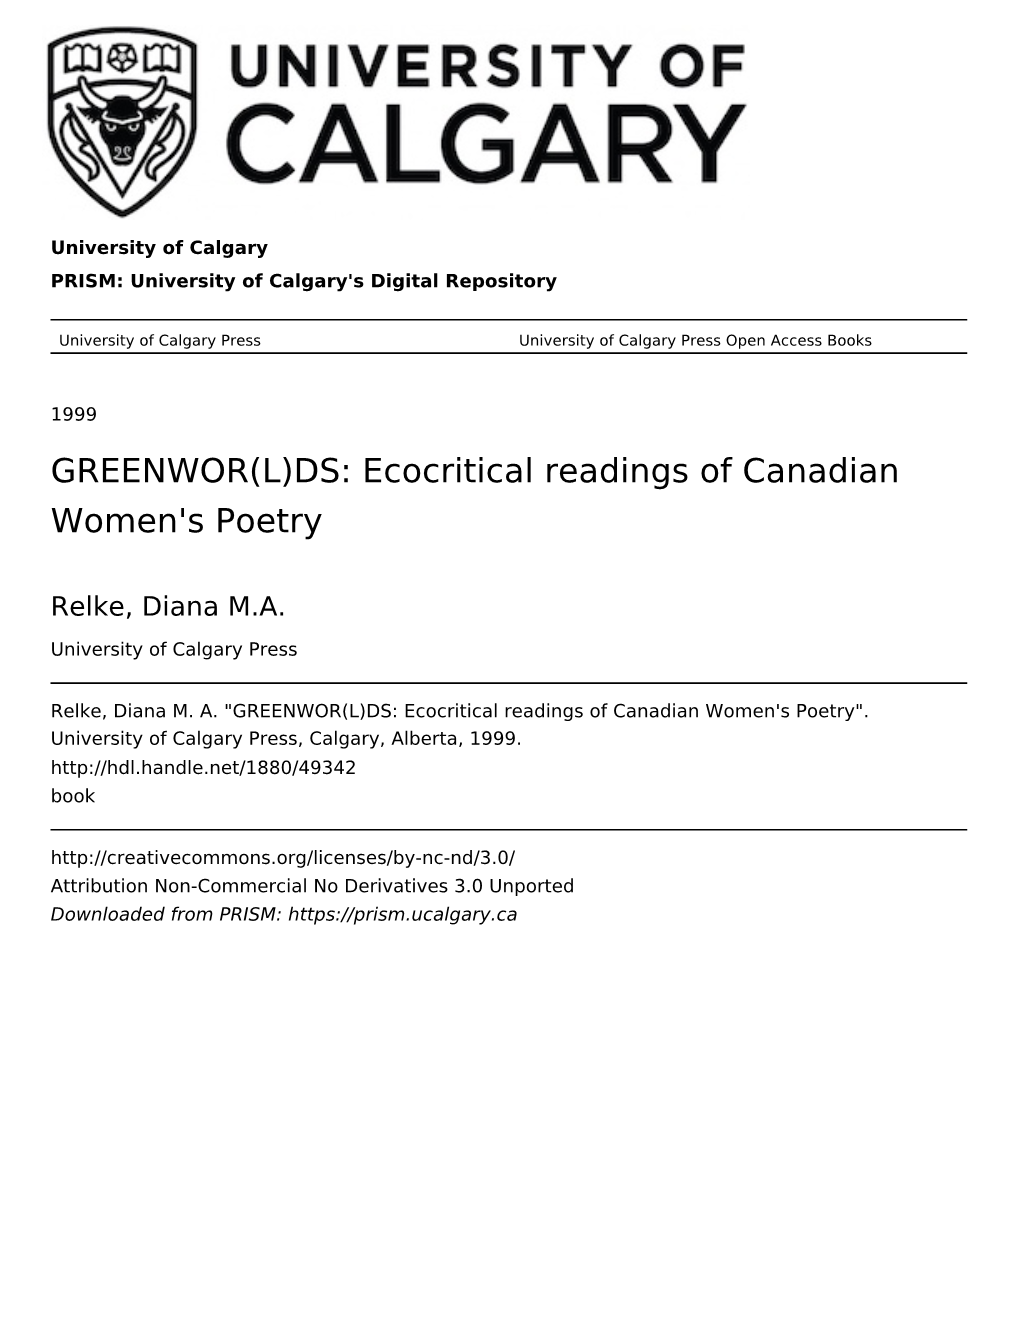 GREENWOR(L)DS: Ecocritical Readings of Canadian Women's Poetry